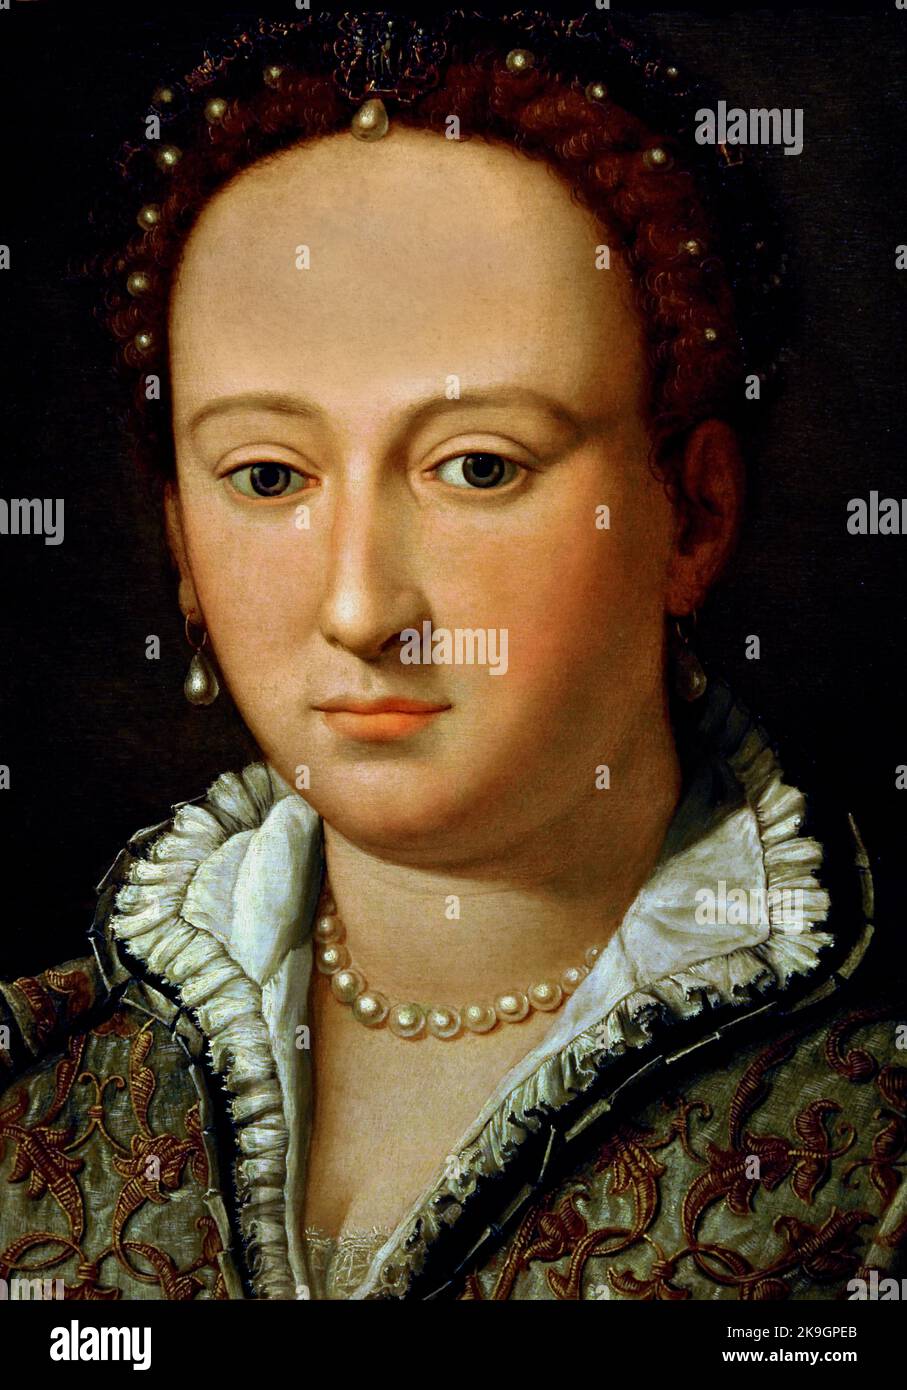 Portrait of Bianca Cappello 1570-1575 by Alessandro Allori, (Florence 1535 – 1607) , Florence, Italy. ( Mistress of Francesco I de Medici  marriage 1957 she became Grand Duches of Tuscany.) Stock Photo